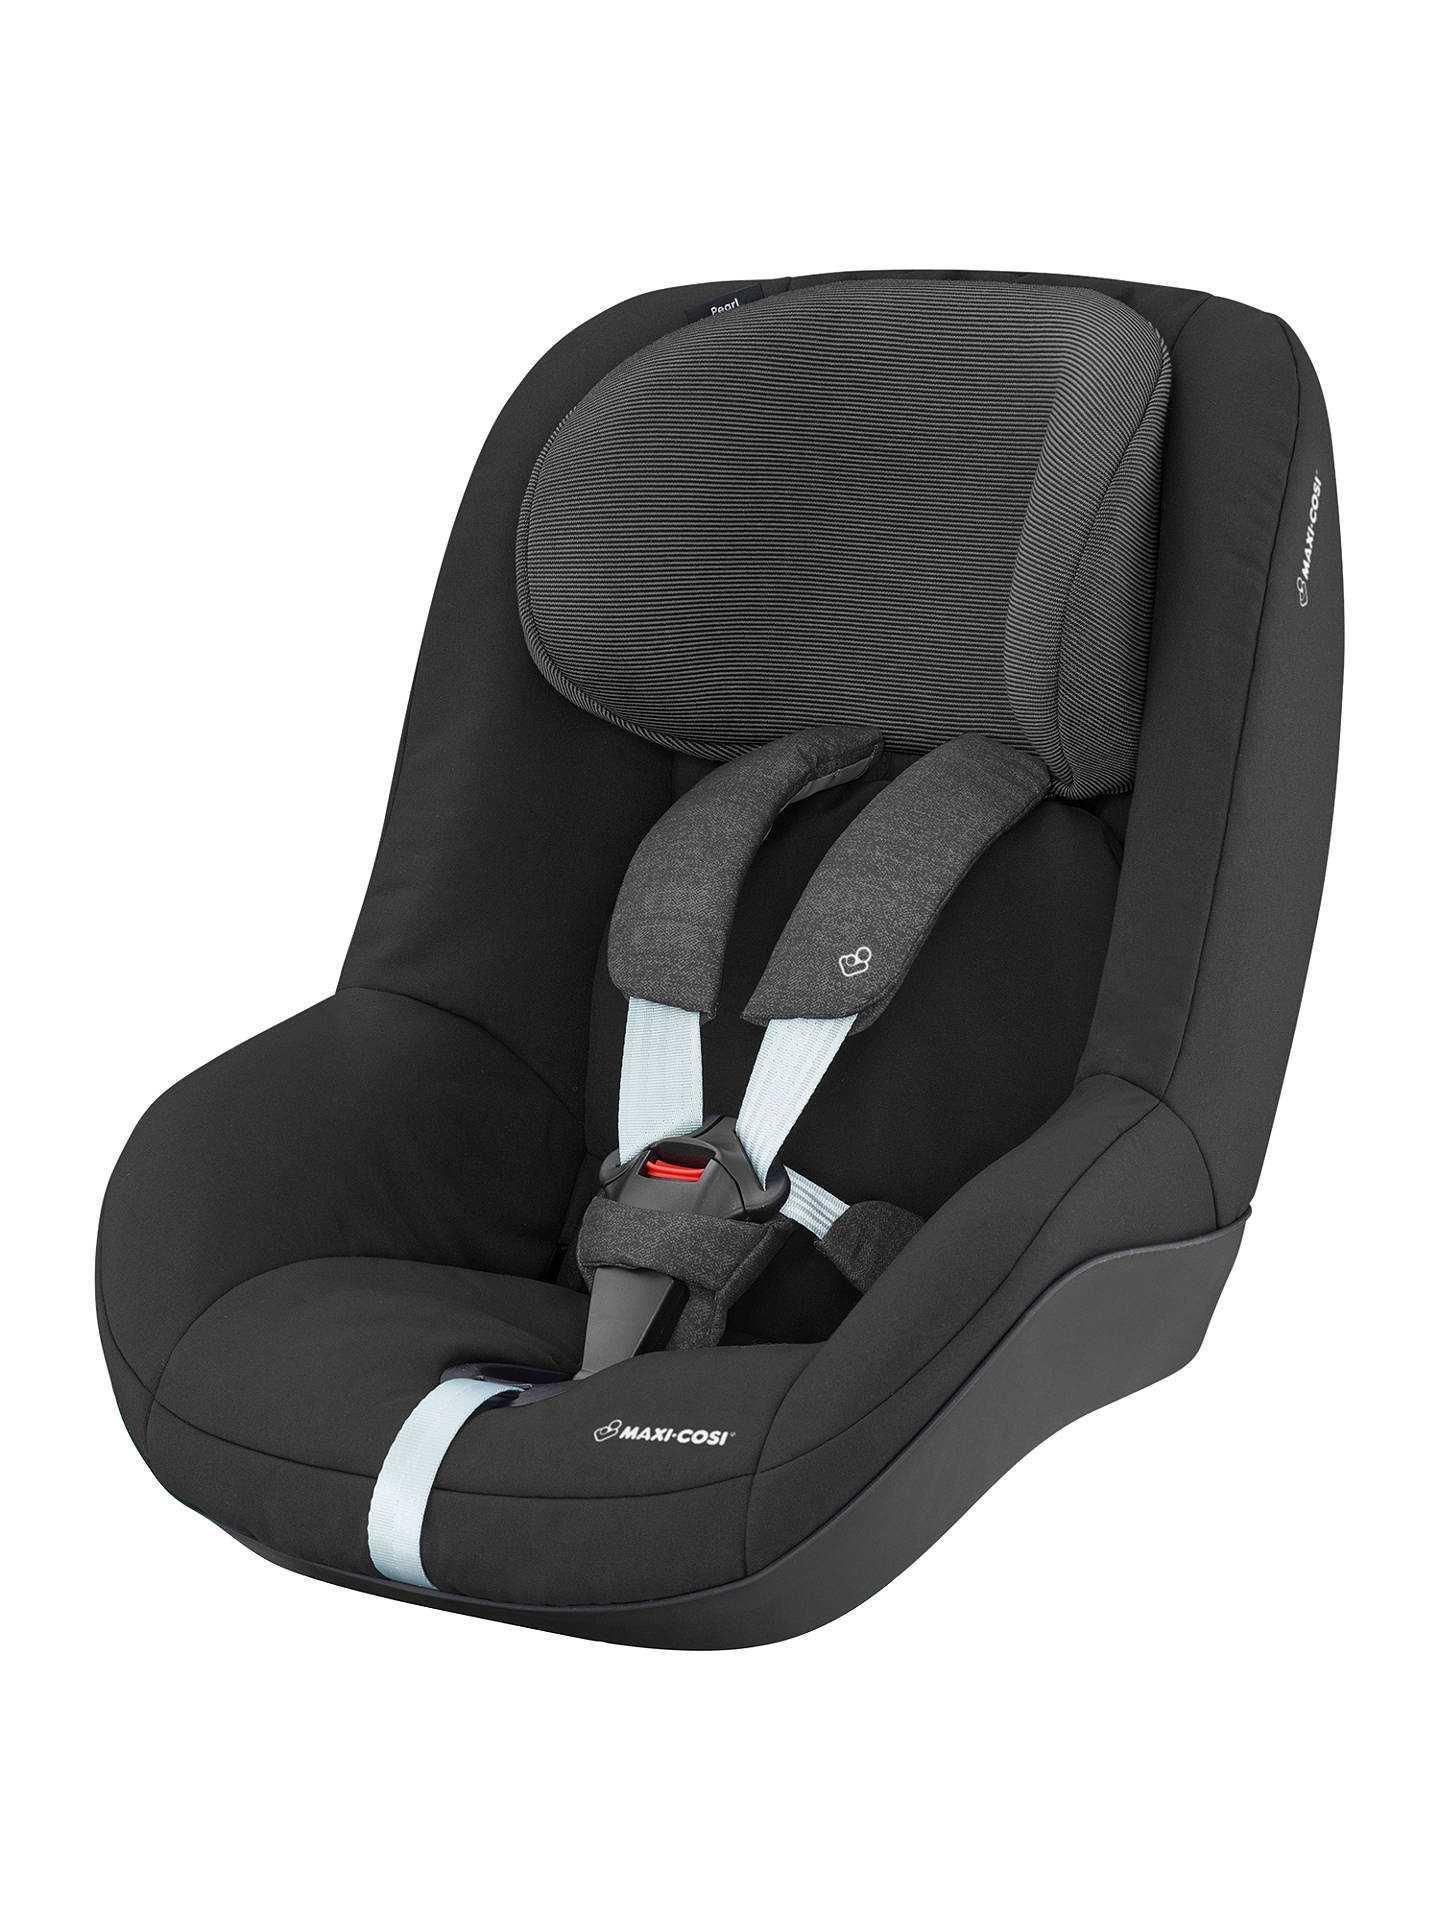 Rrp £180 Unboxed Maxi-Cosi Pearl Baby Car Safety Seat From Sizes 9 Months Up To 4 Years